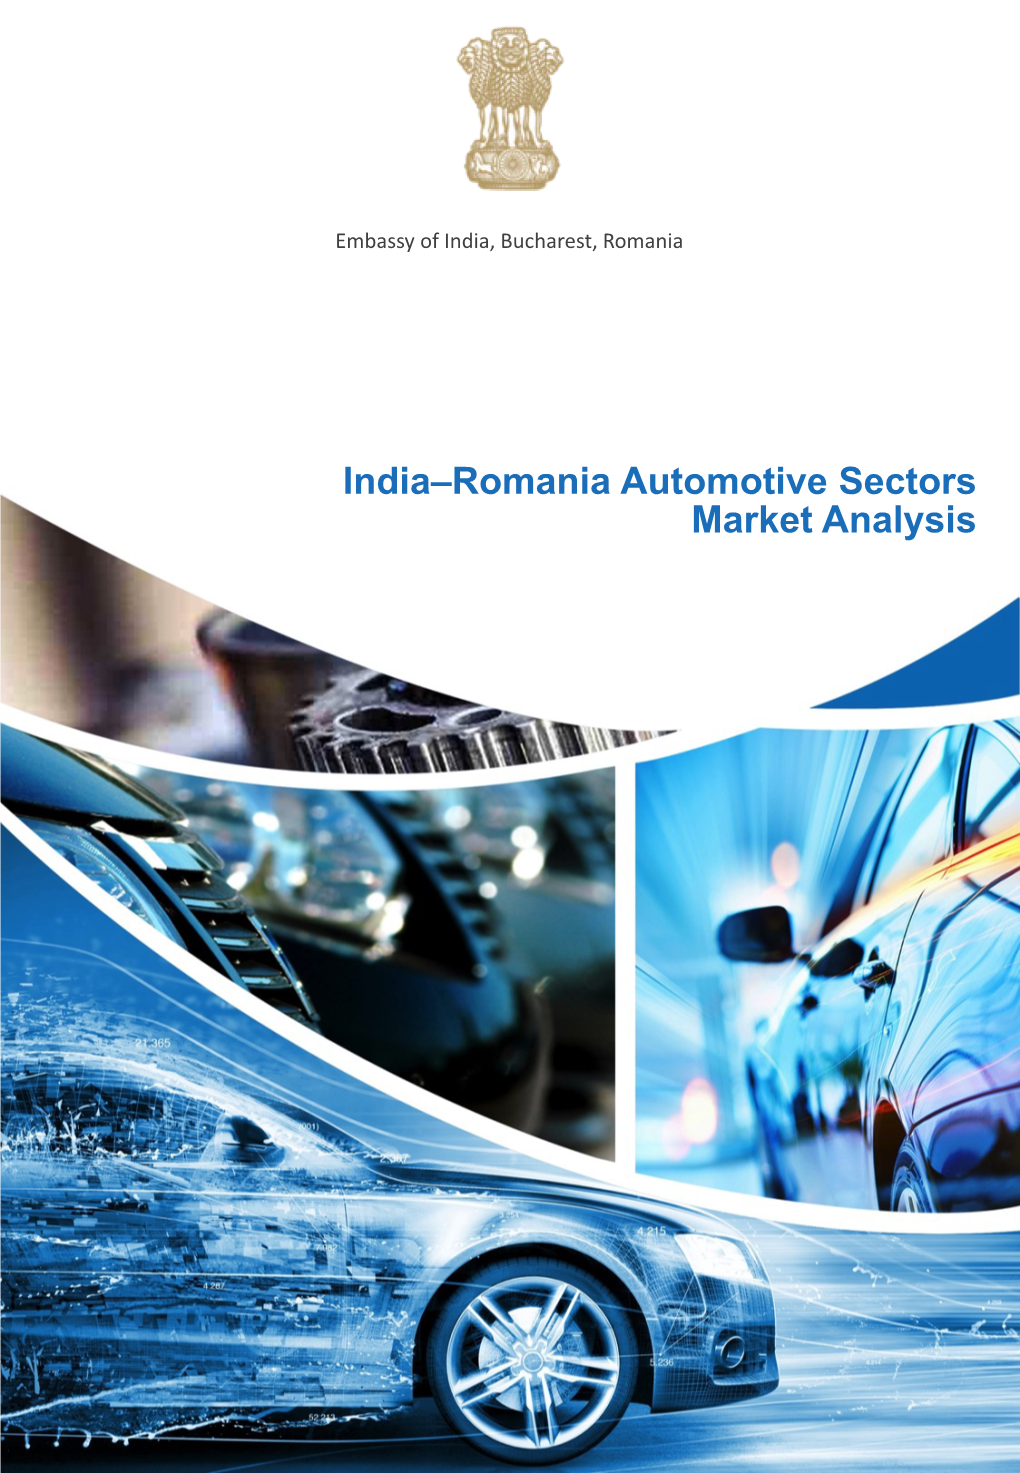 Automotive Sector of Romania and India